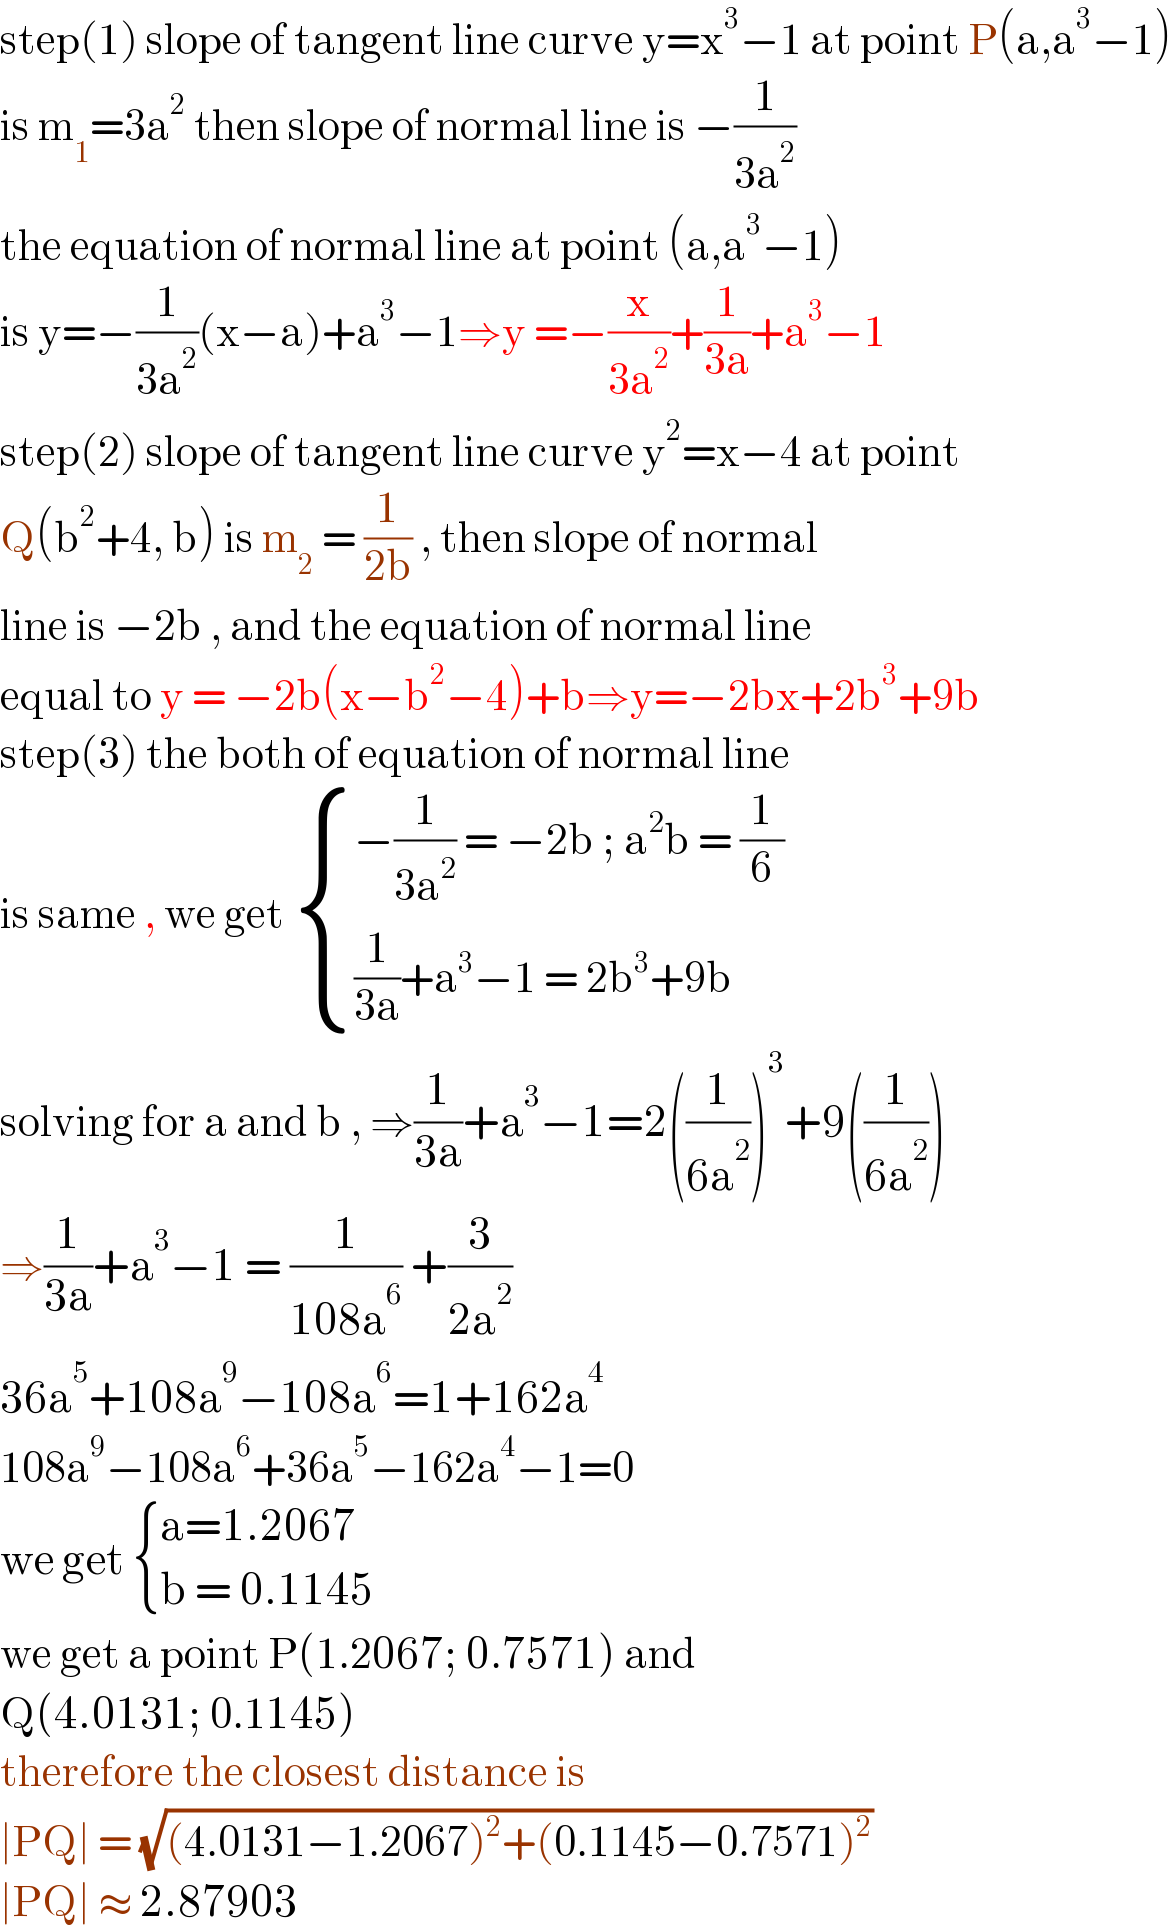 step(1) slope of tangent line curve y=x^3 −1 at point P(a,a^3 −1)  is m_1 =3a^2  then slope of normal line is −(1/(3a^2 ))  the equation of normal line at point (a,a^3 −1)  is y=−(1/(3a^2 ))(x−a)+a^3 −1⇒y =−(x/(3a^2 ))+(1/(3a))+a^3 −1  step(2) slope of tangent line curve y^2 =x−4 at point  Q(b^2 +4, b) is m_2  = (1/(2b)) , then slope of normal  line is −2b , and the equation of normal line  equal to y = −2b(x−b^2 −4)+b⇒y=−2bx+2b^3 +9b  step(3) the both of equation of normal line  is same , we get  { ((−(1/(3a^2 )) = −2b ; a^2 b = (1/6))),(((1/(3a))+a^3 −1 = 2b^3 +9b)) :}  solving for a and b , ⇒(1/(3a))+a^3 −1=2((1/(6a^2 )))^3 +9((1/(6a^2 )))  ⇒(1/(3a))+a^3 −1 = (1/(108a^6 )) +(3/(2a^2 ))  36a^5 +108a^9 −108a^6 =1+162a^4   108a^9 −108a^6 +36a^5 −162a^4 −1=0  we get  { ((a=1.2067)),((b = 0.1145)) :}  we get a point P(1.2067; 0.7571) and   Q(4.0131; 0.1145)  therefore the closest distance is   ∣PQ∣ = (√((4.0131−1.2067)^2 +(0.1145−0.7571)^2 ))  ∣PQ∣ ≈ 2.87903  